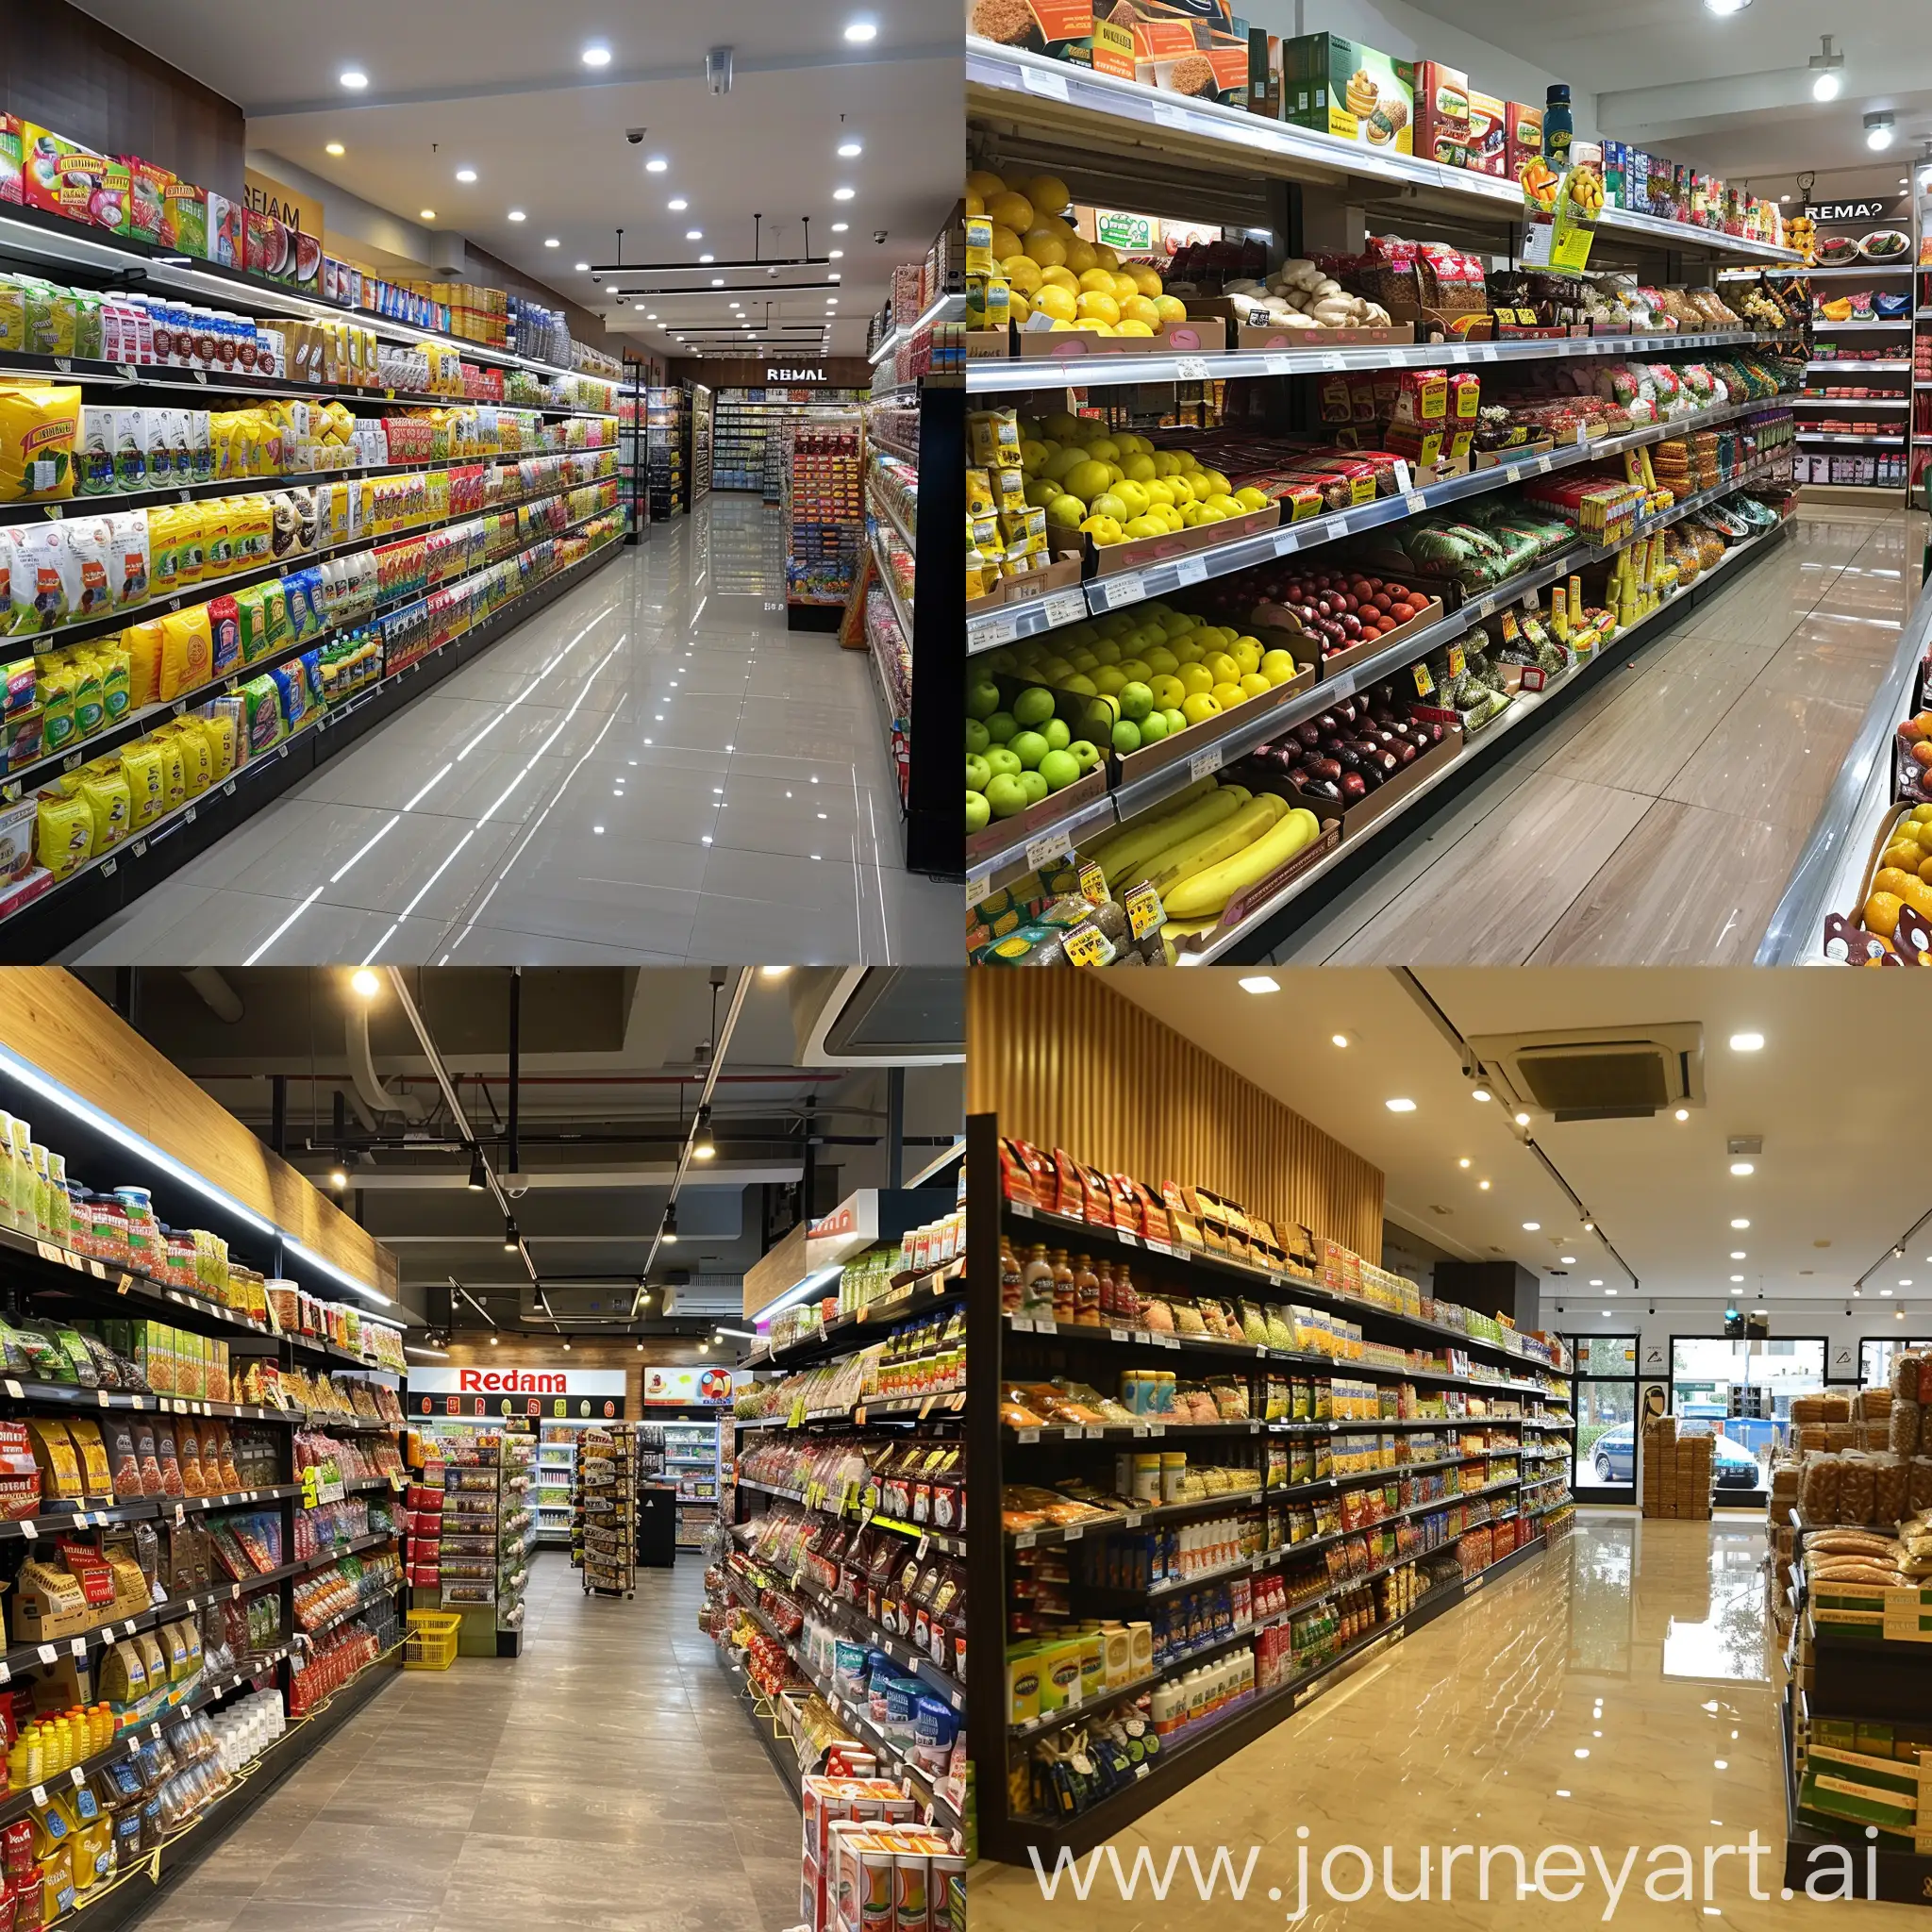 Reliance-Stores-Interior-with-Vast-Product-Variety